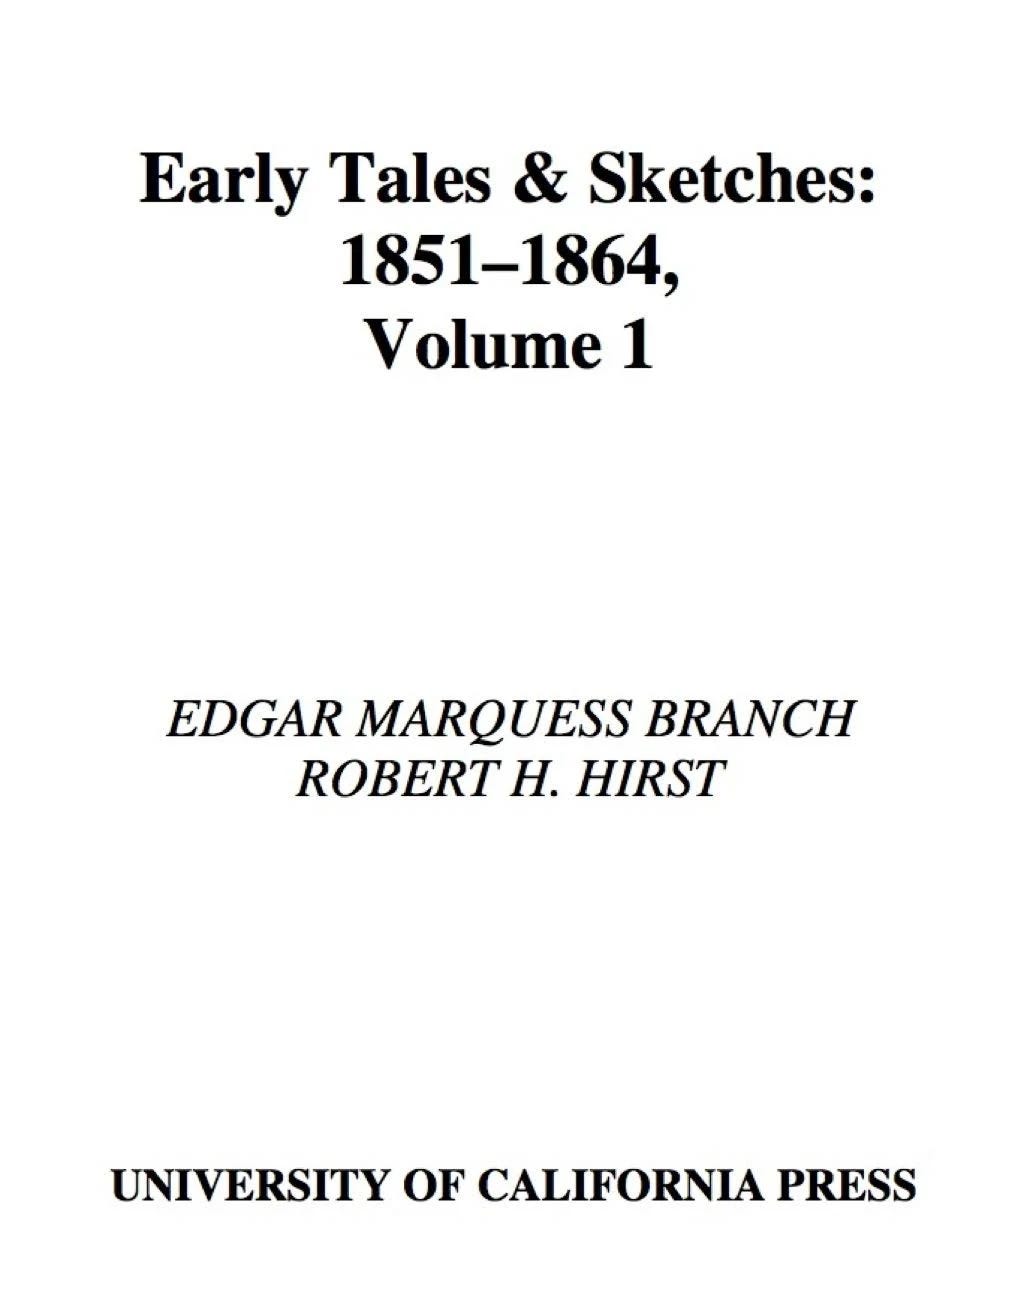 Classic Mark Twain Tales & Sketches: Early Writings, 1851-1864 | Image